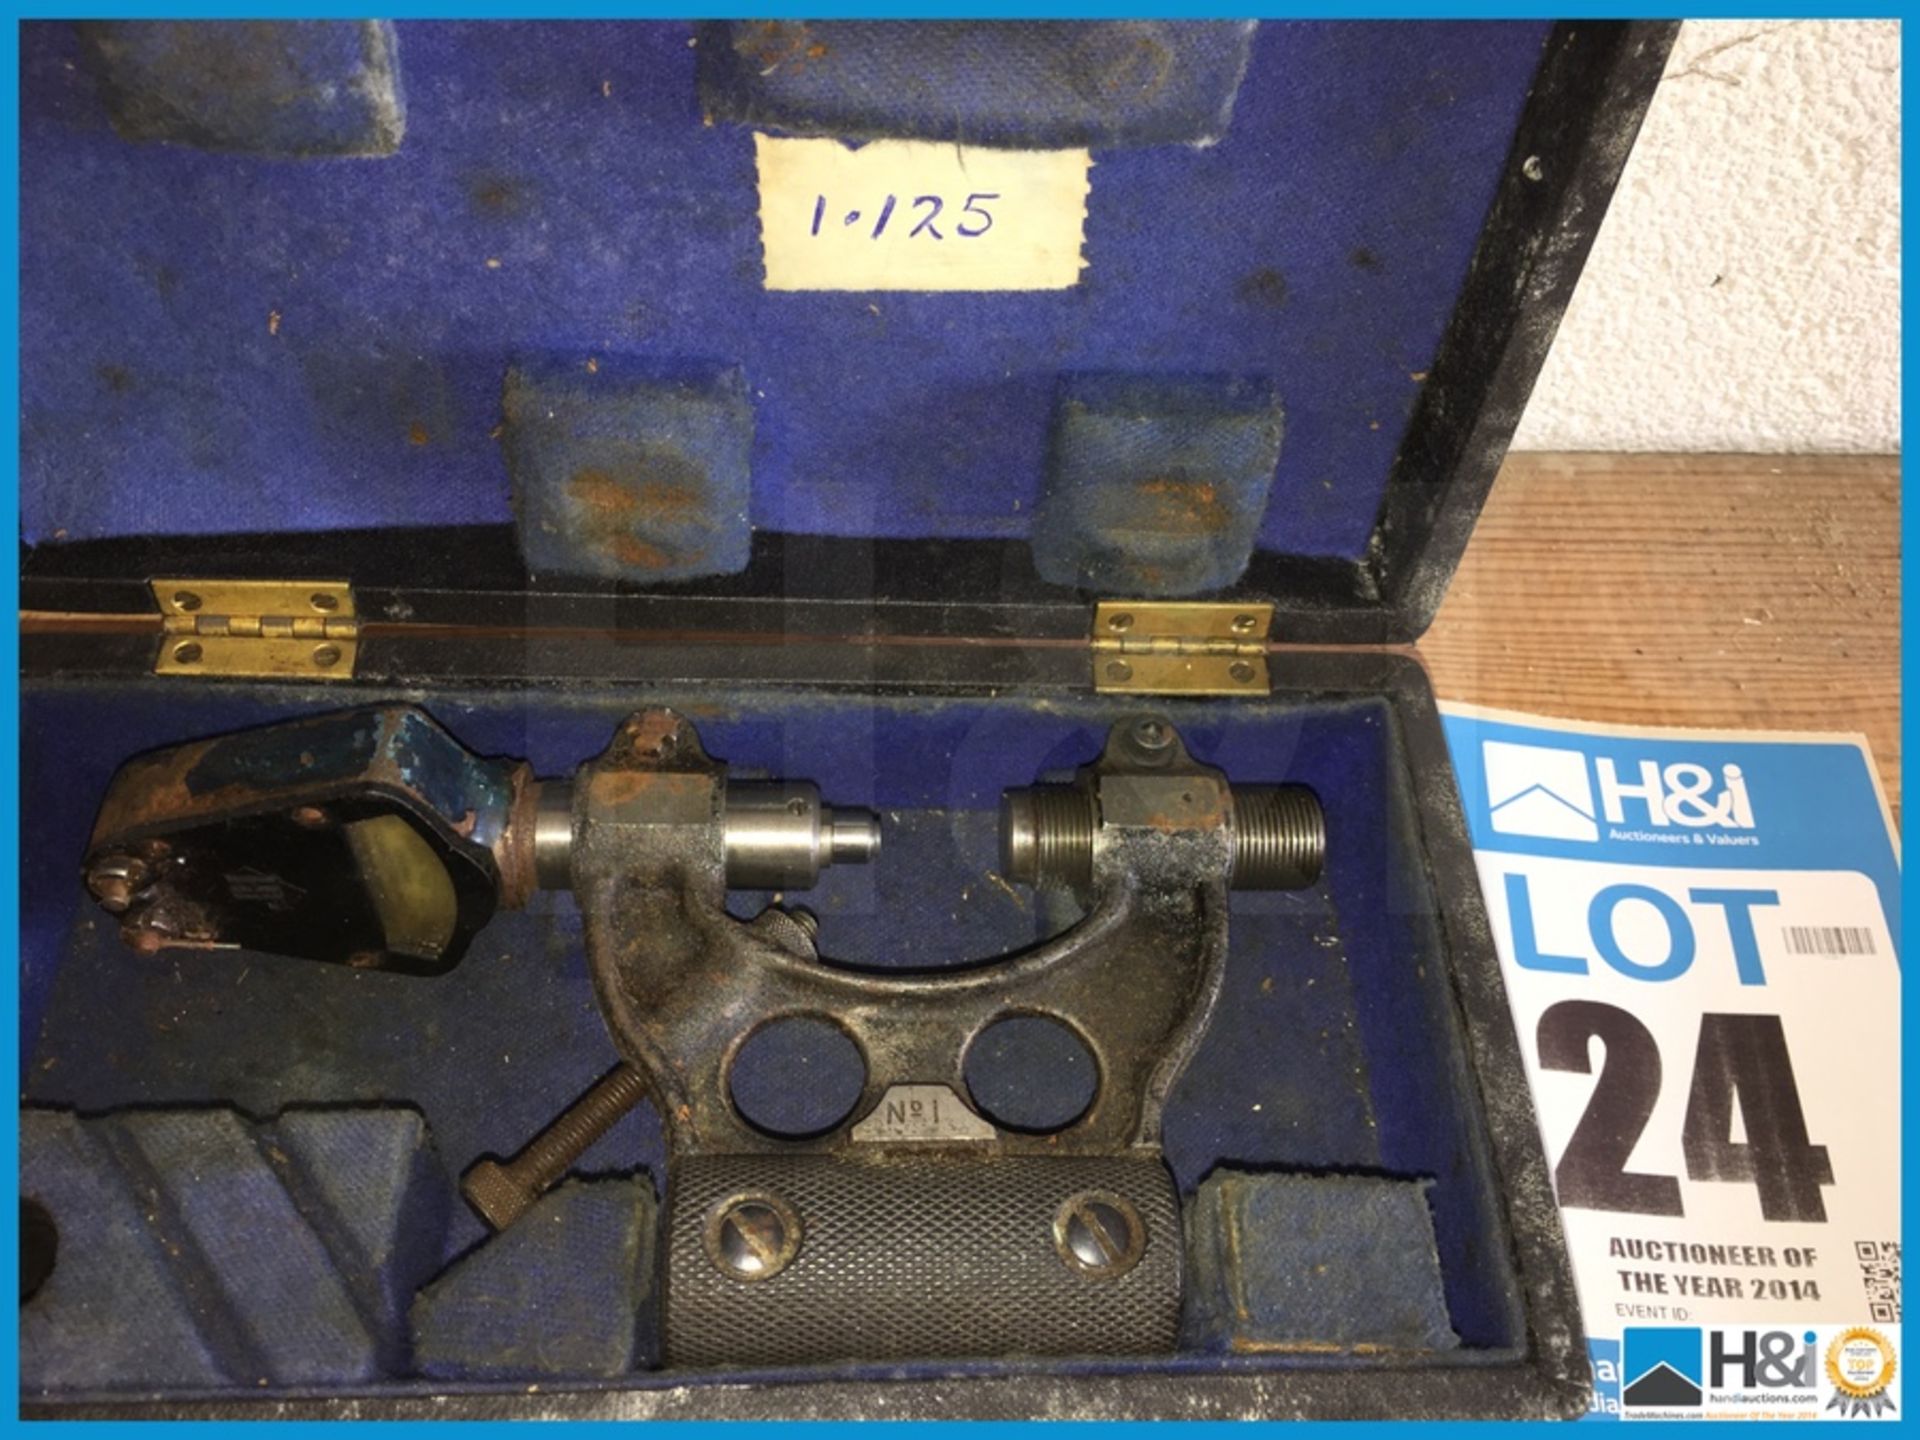 Vintage caliper indicator guage in case. this lot can be shipped for £10.00 plus vat Appraisal: